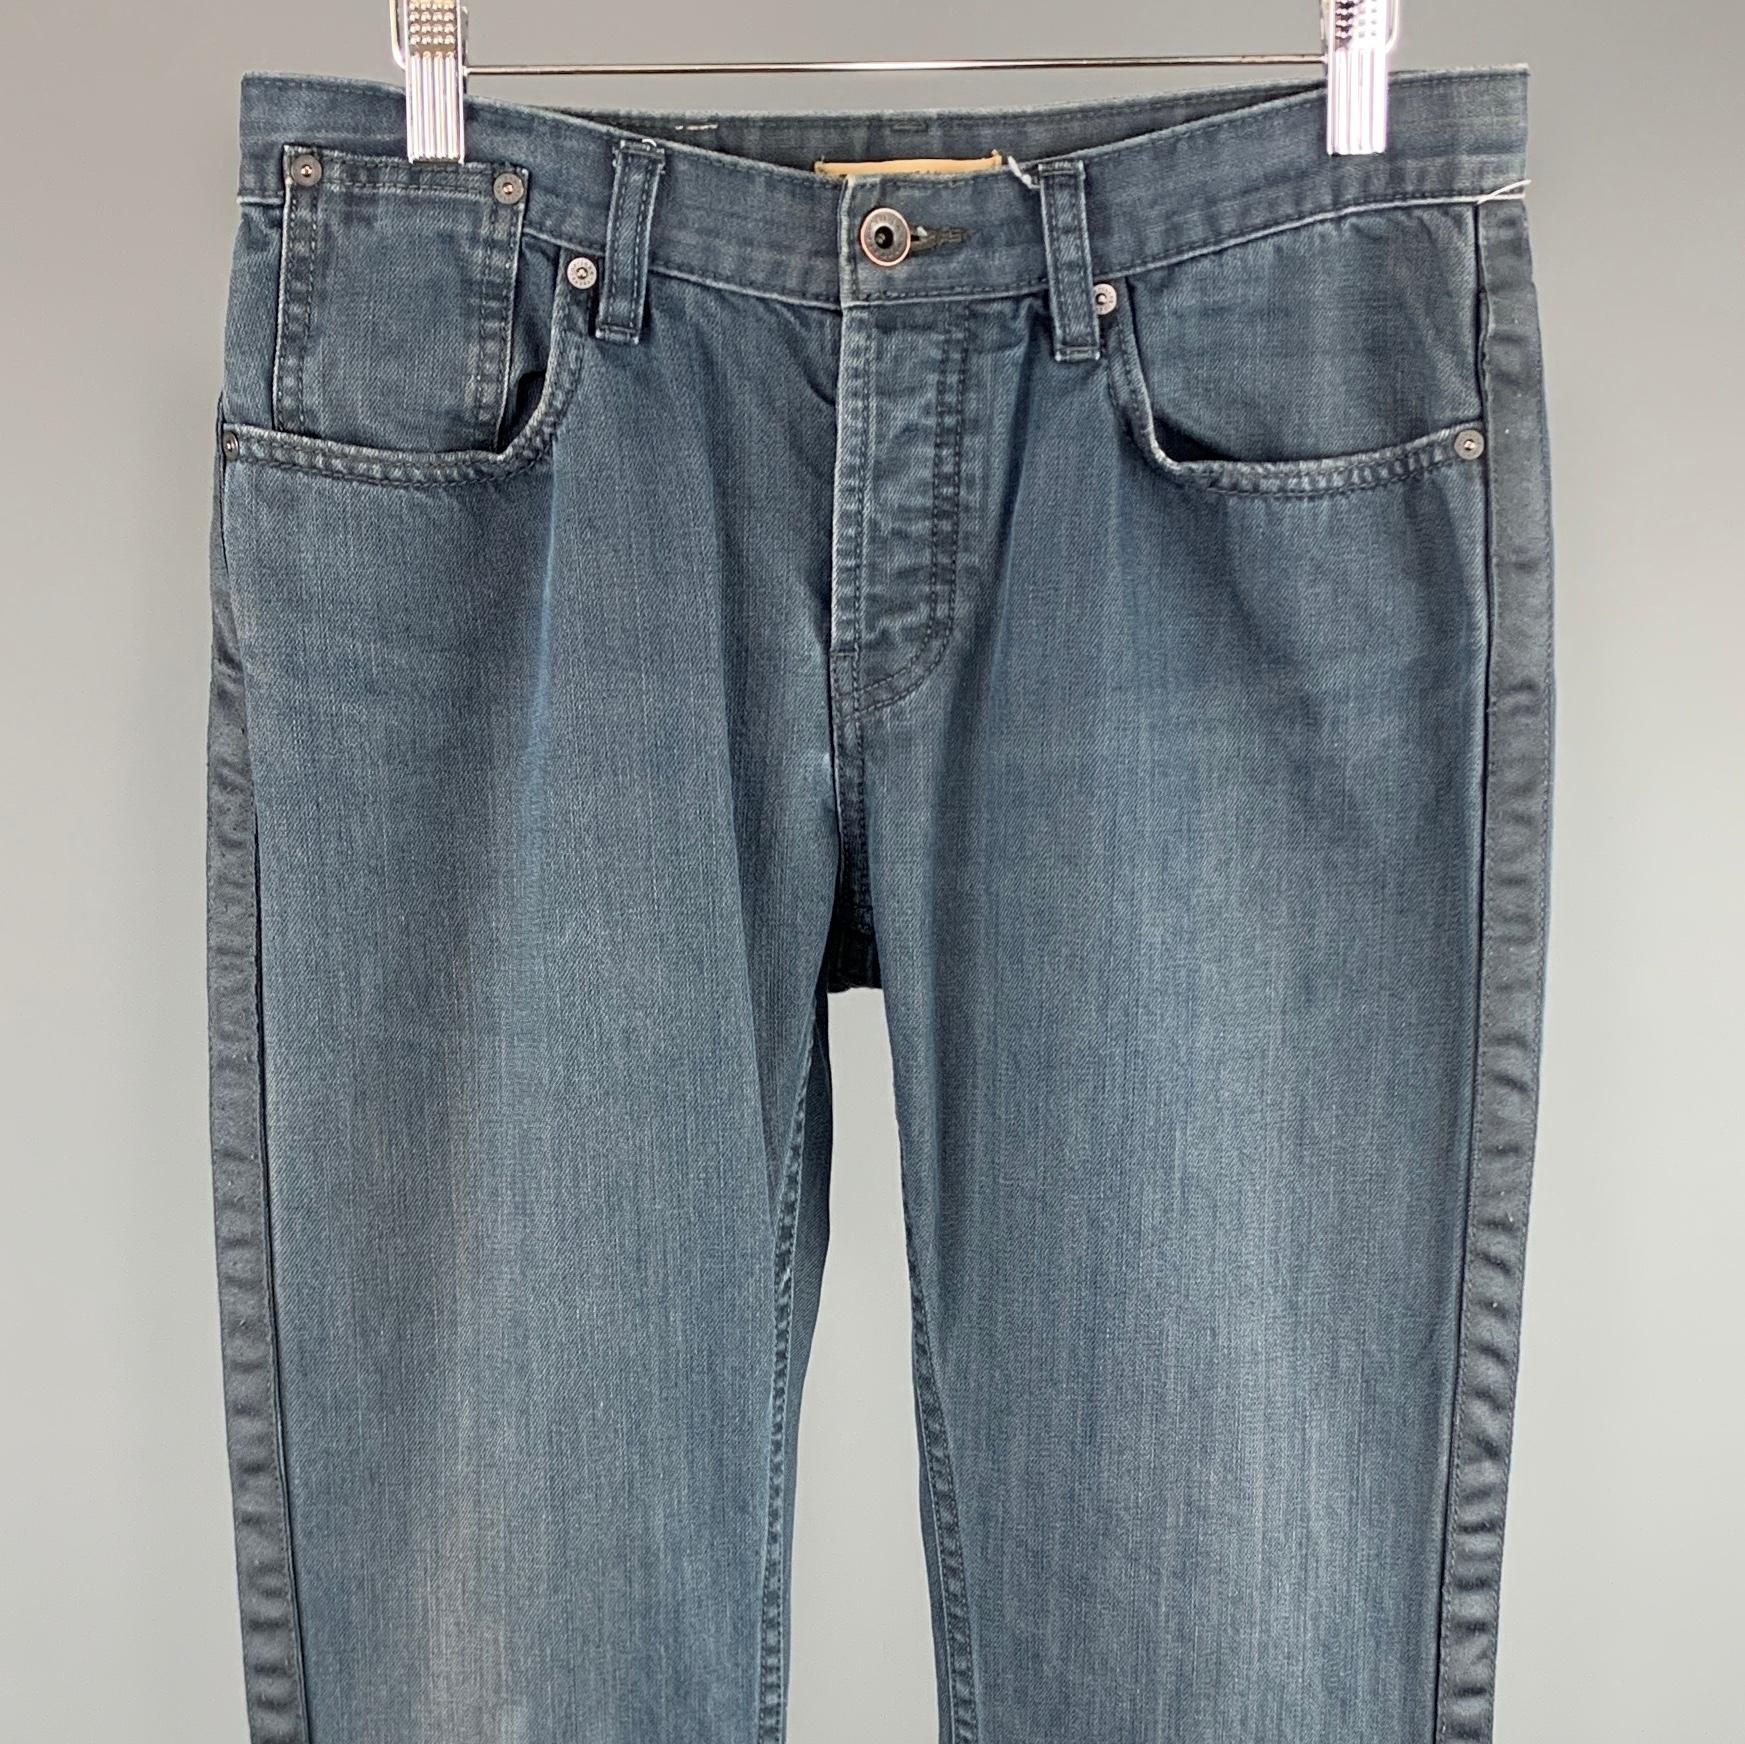 JOHN VARVATOS *U.S.A jeans comes in a navy solid cotton featuring a flat front style and a button fly closure. 
 

Excellent Pre-Owned Condition.
Marked: 31 RG

Measurements:

Waist: 31 in. 
Rise: 8 in. 
Inseam: 34 in. 

SKU: 98138
Category: